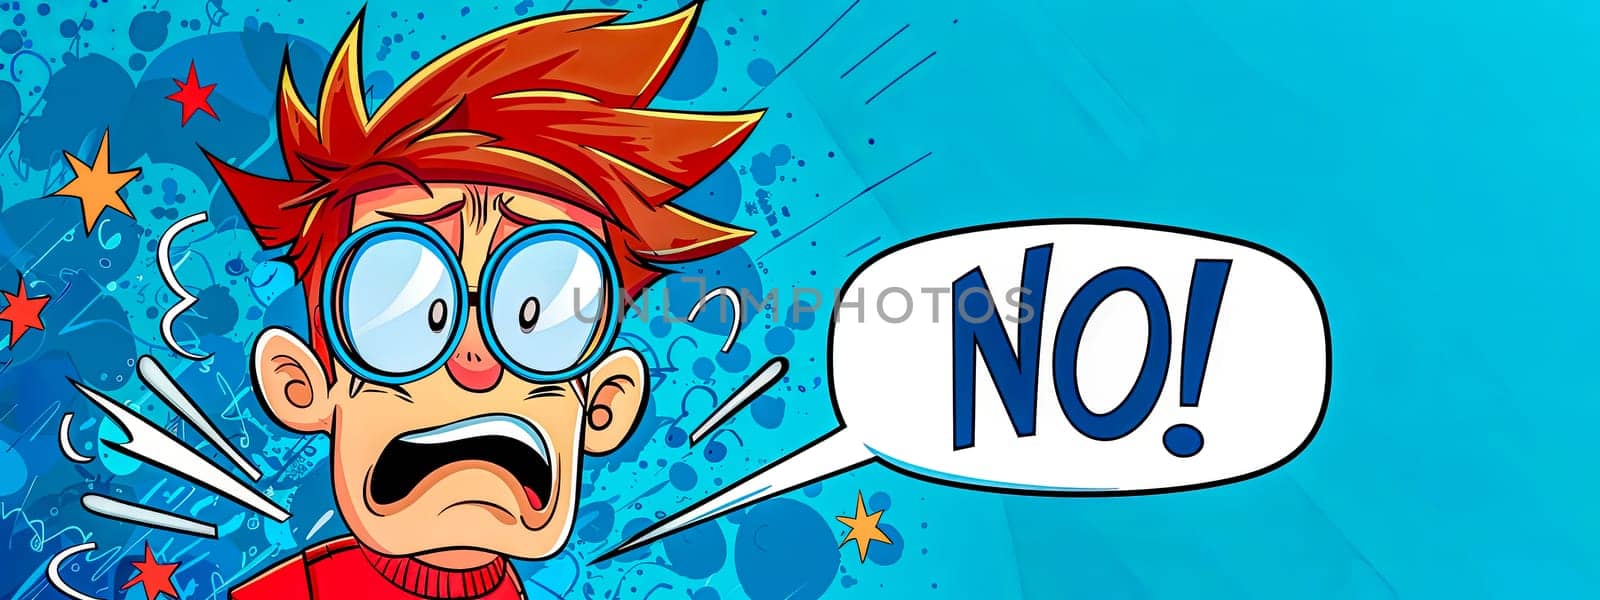 Colorful illustration of a young cartoon boy with a shocked expression and a speech bubble saying no!